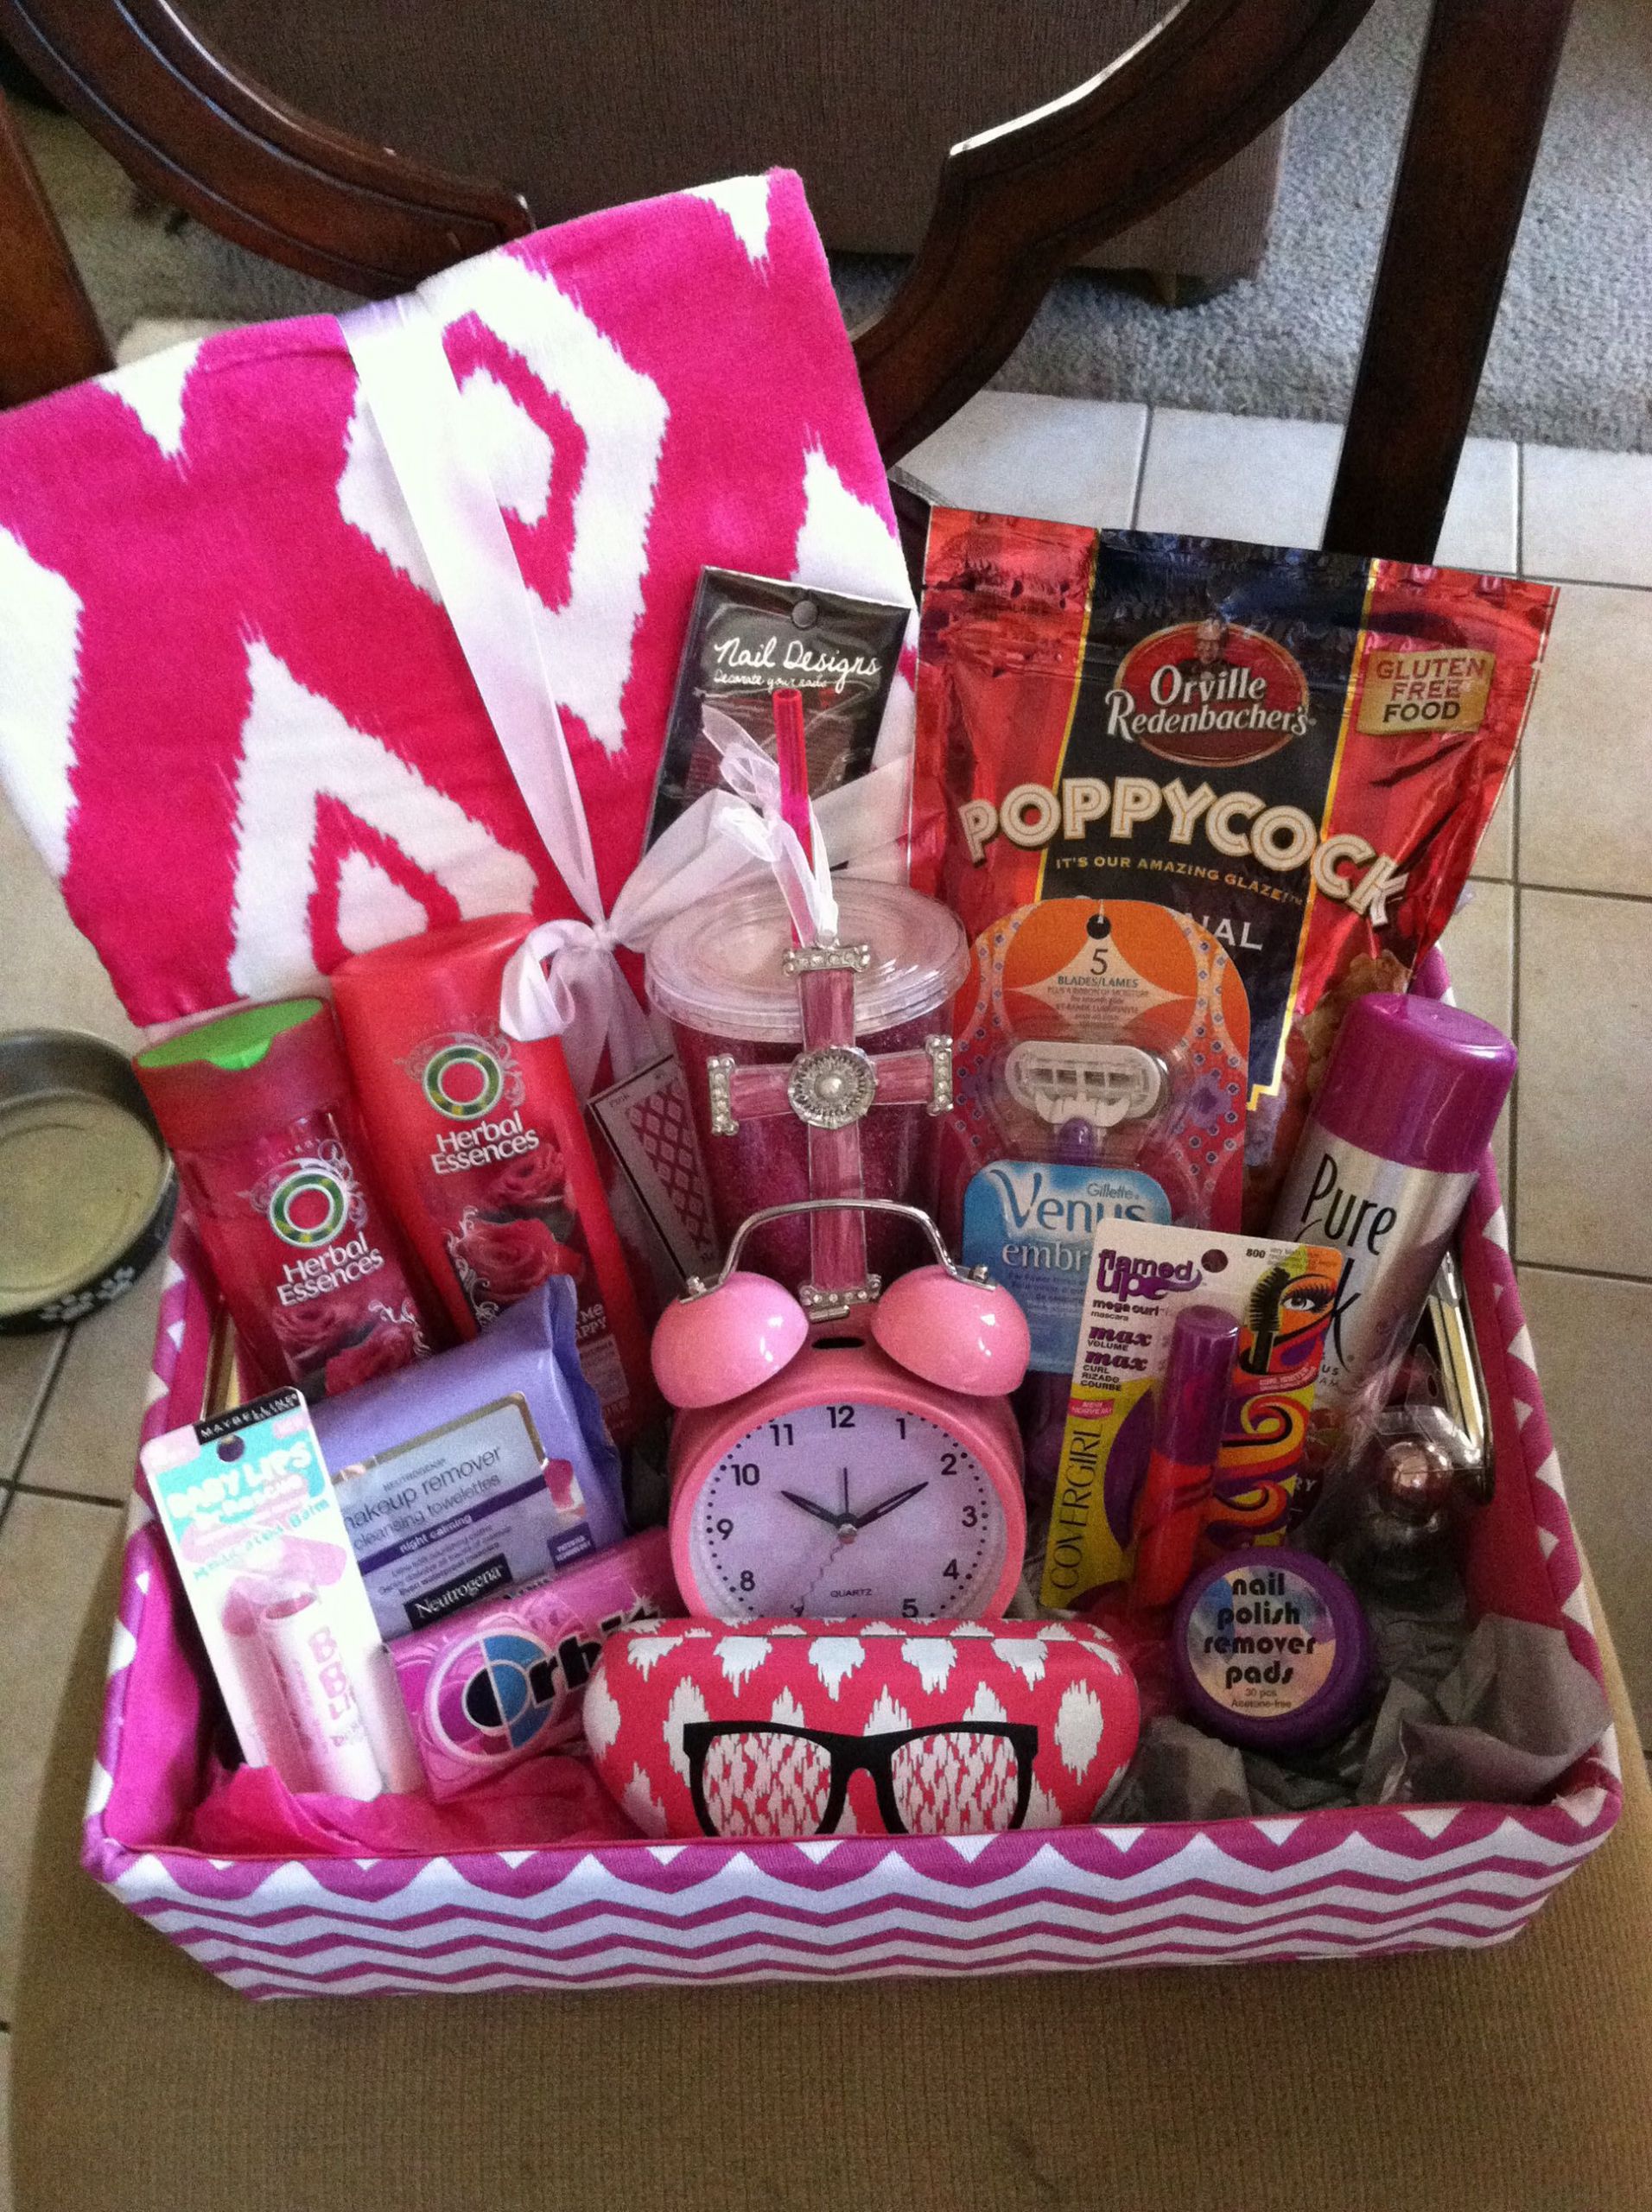 Cute Gift Basket Ideas For Friends
 DIY Dollar Tree Valentines Gift Baskets for Family and